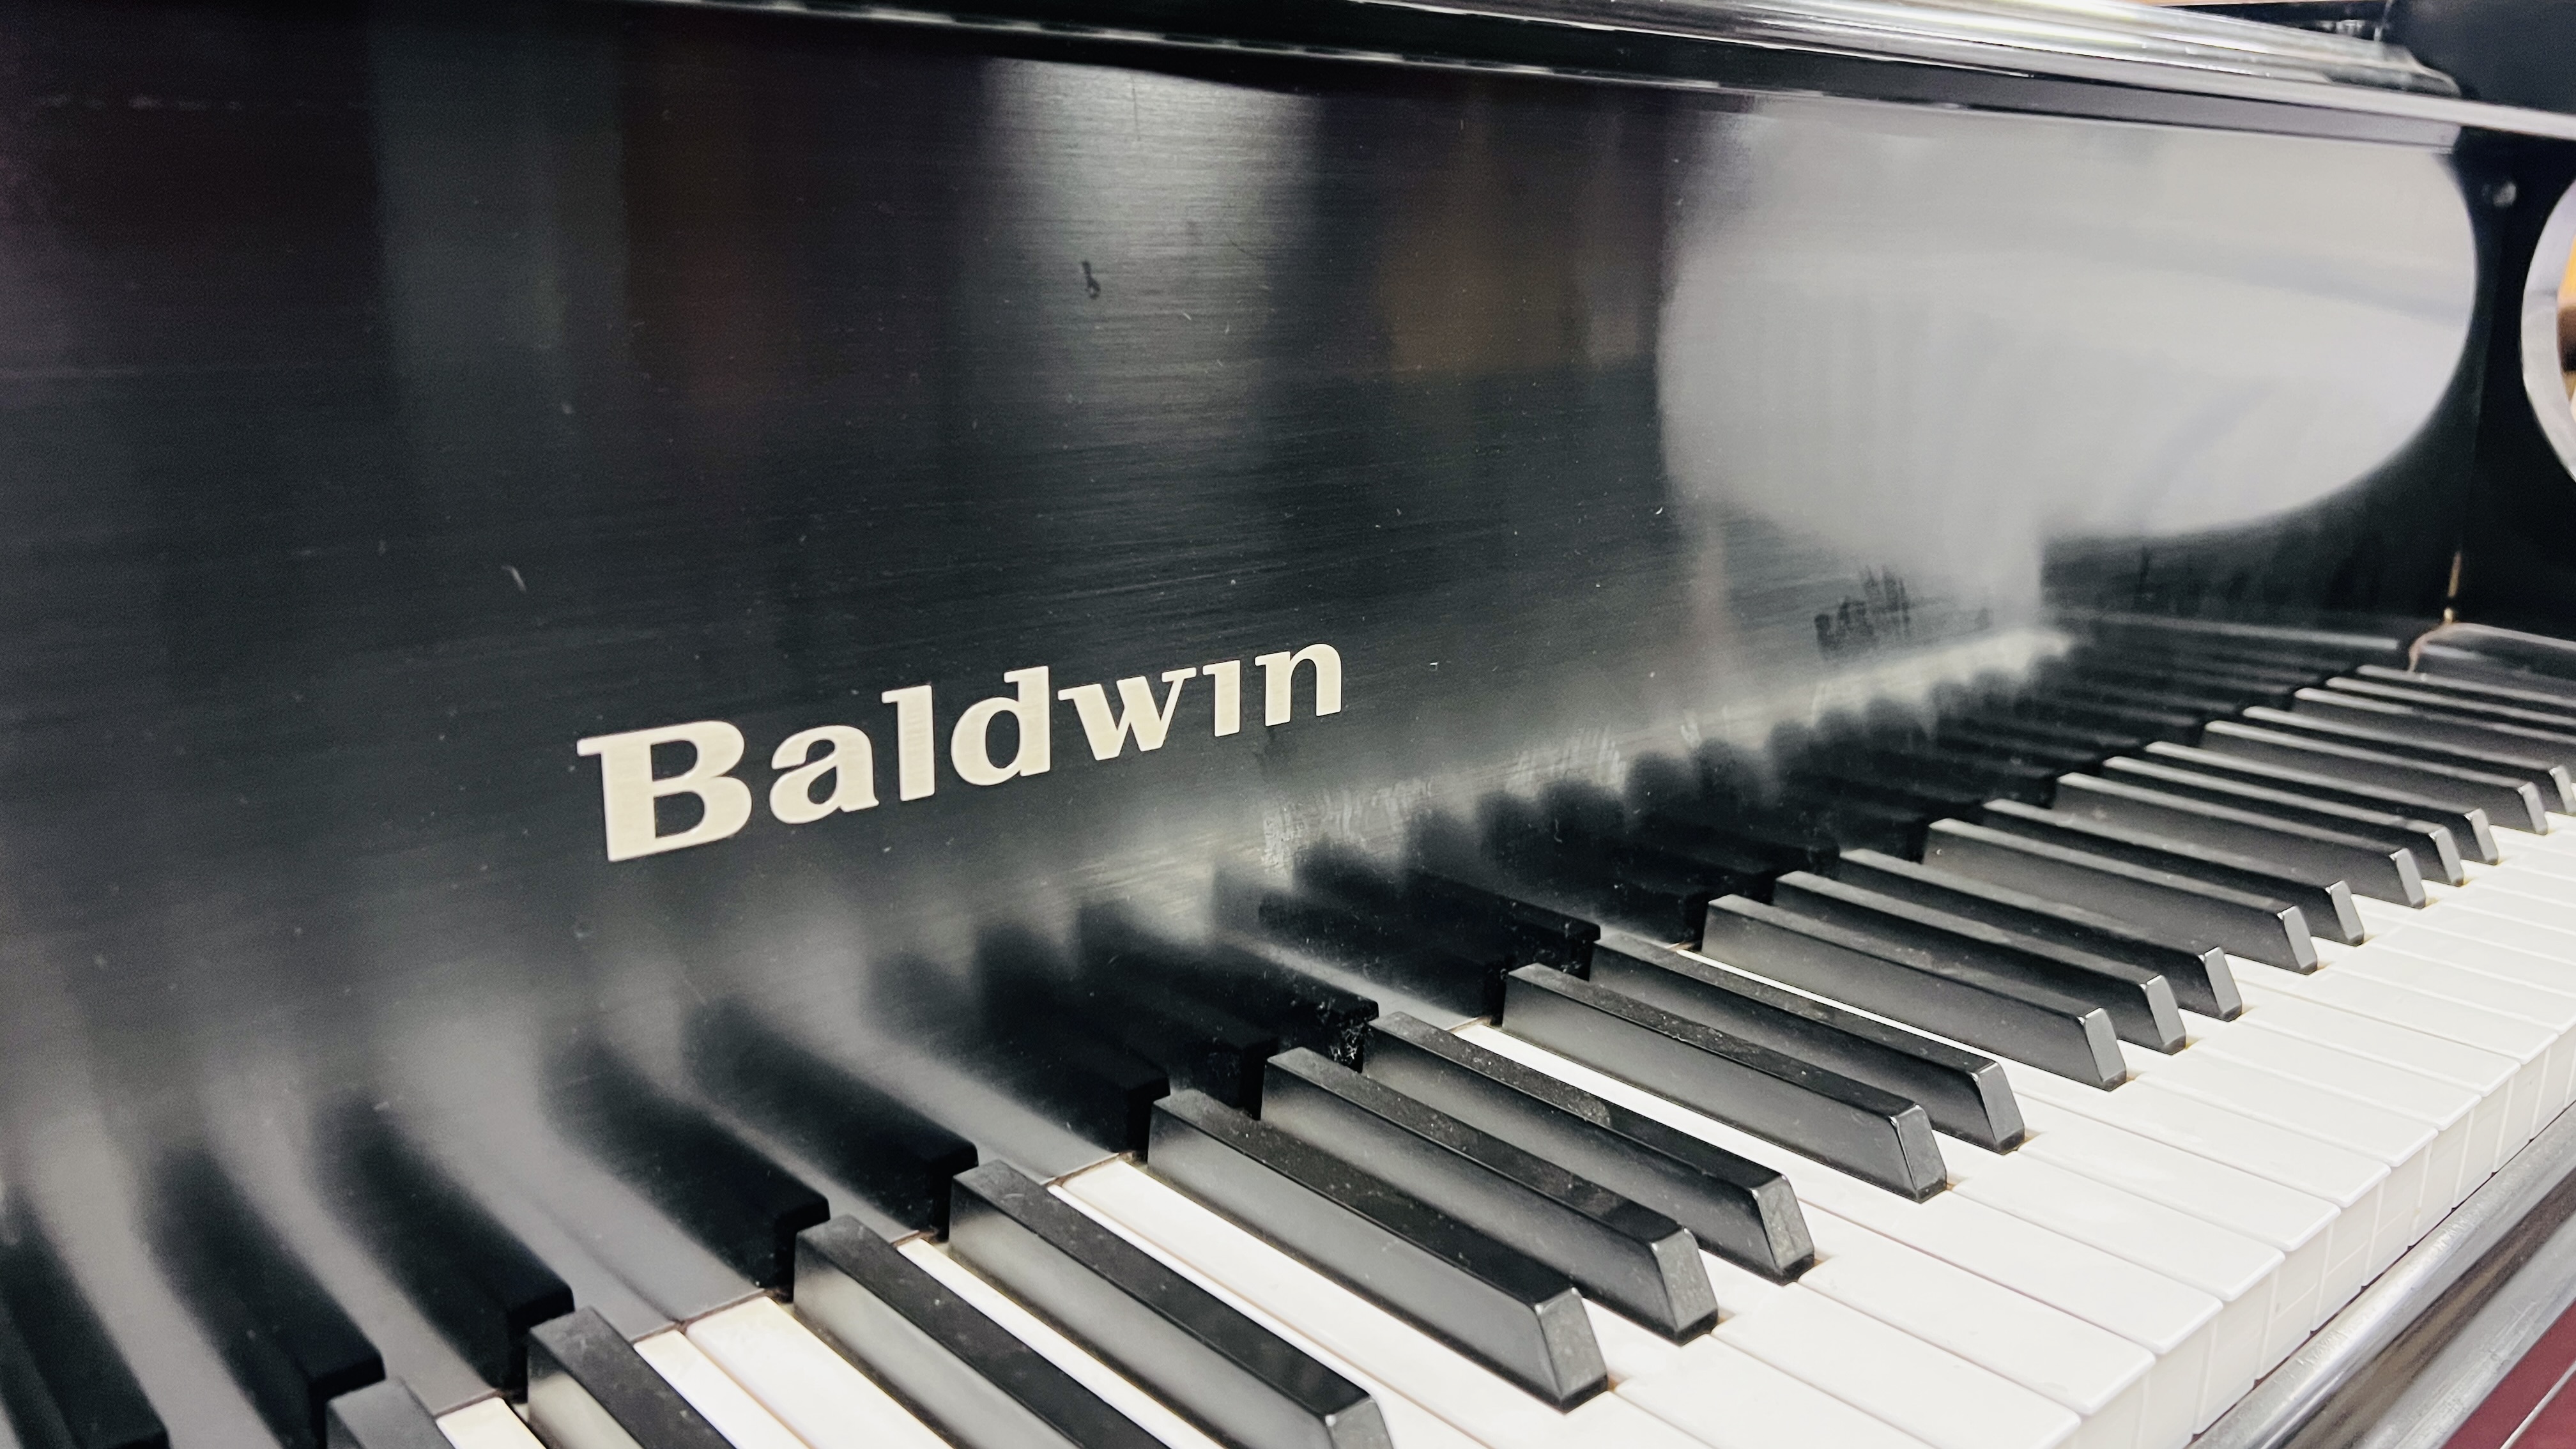 A BALDWIN BABY GRAND PIANO AND BUTTONED PIANO STOOL. - Image 14 of 23